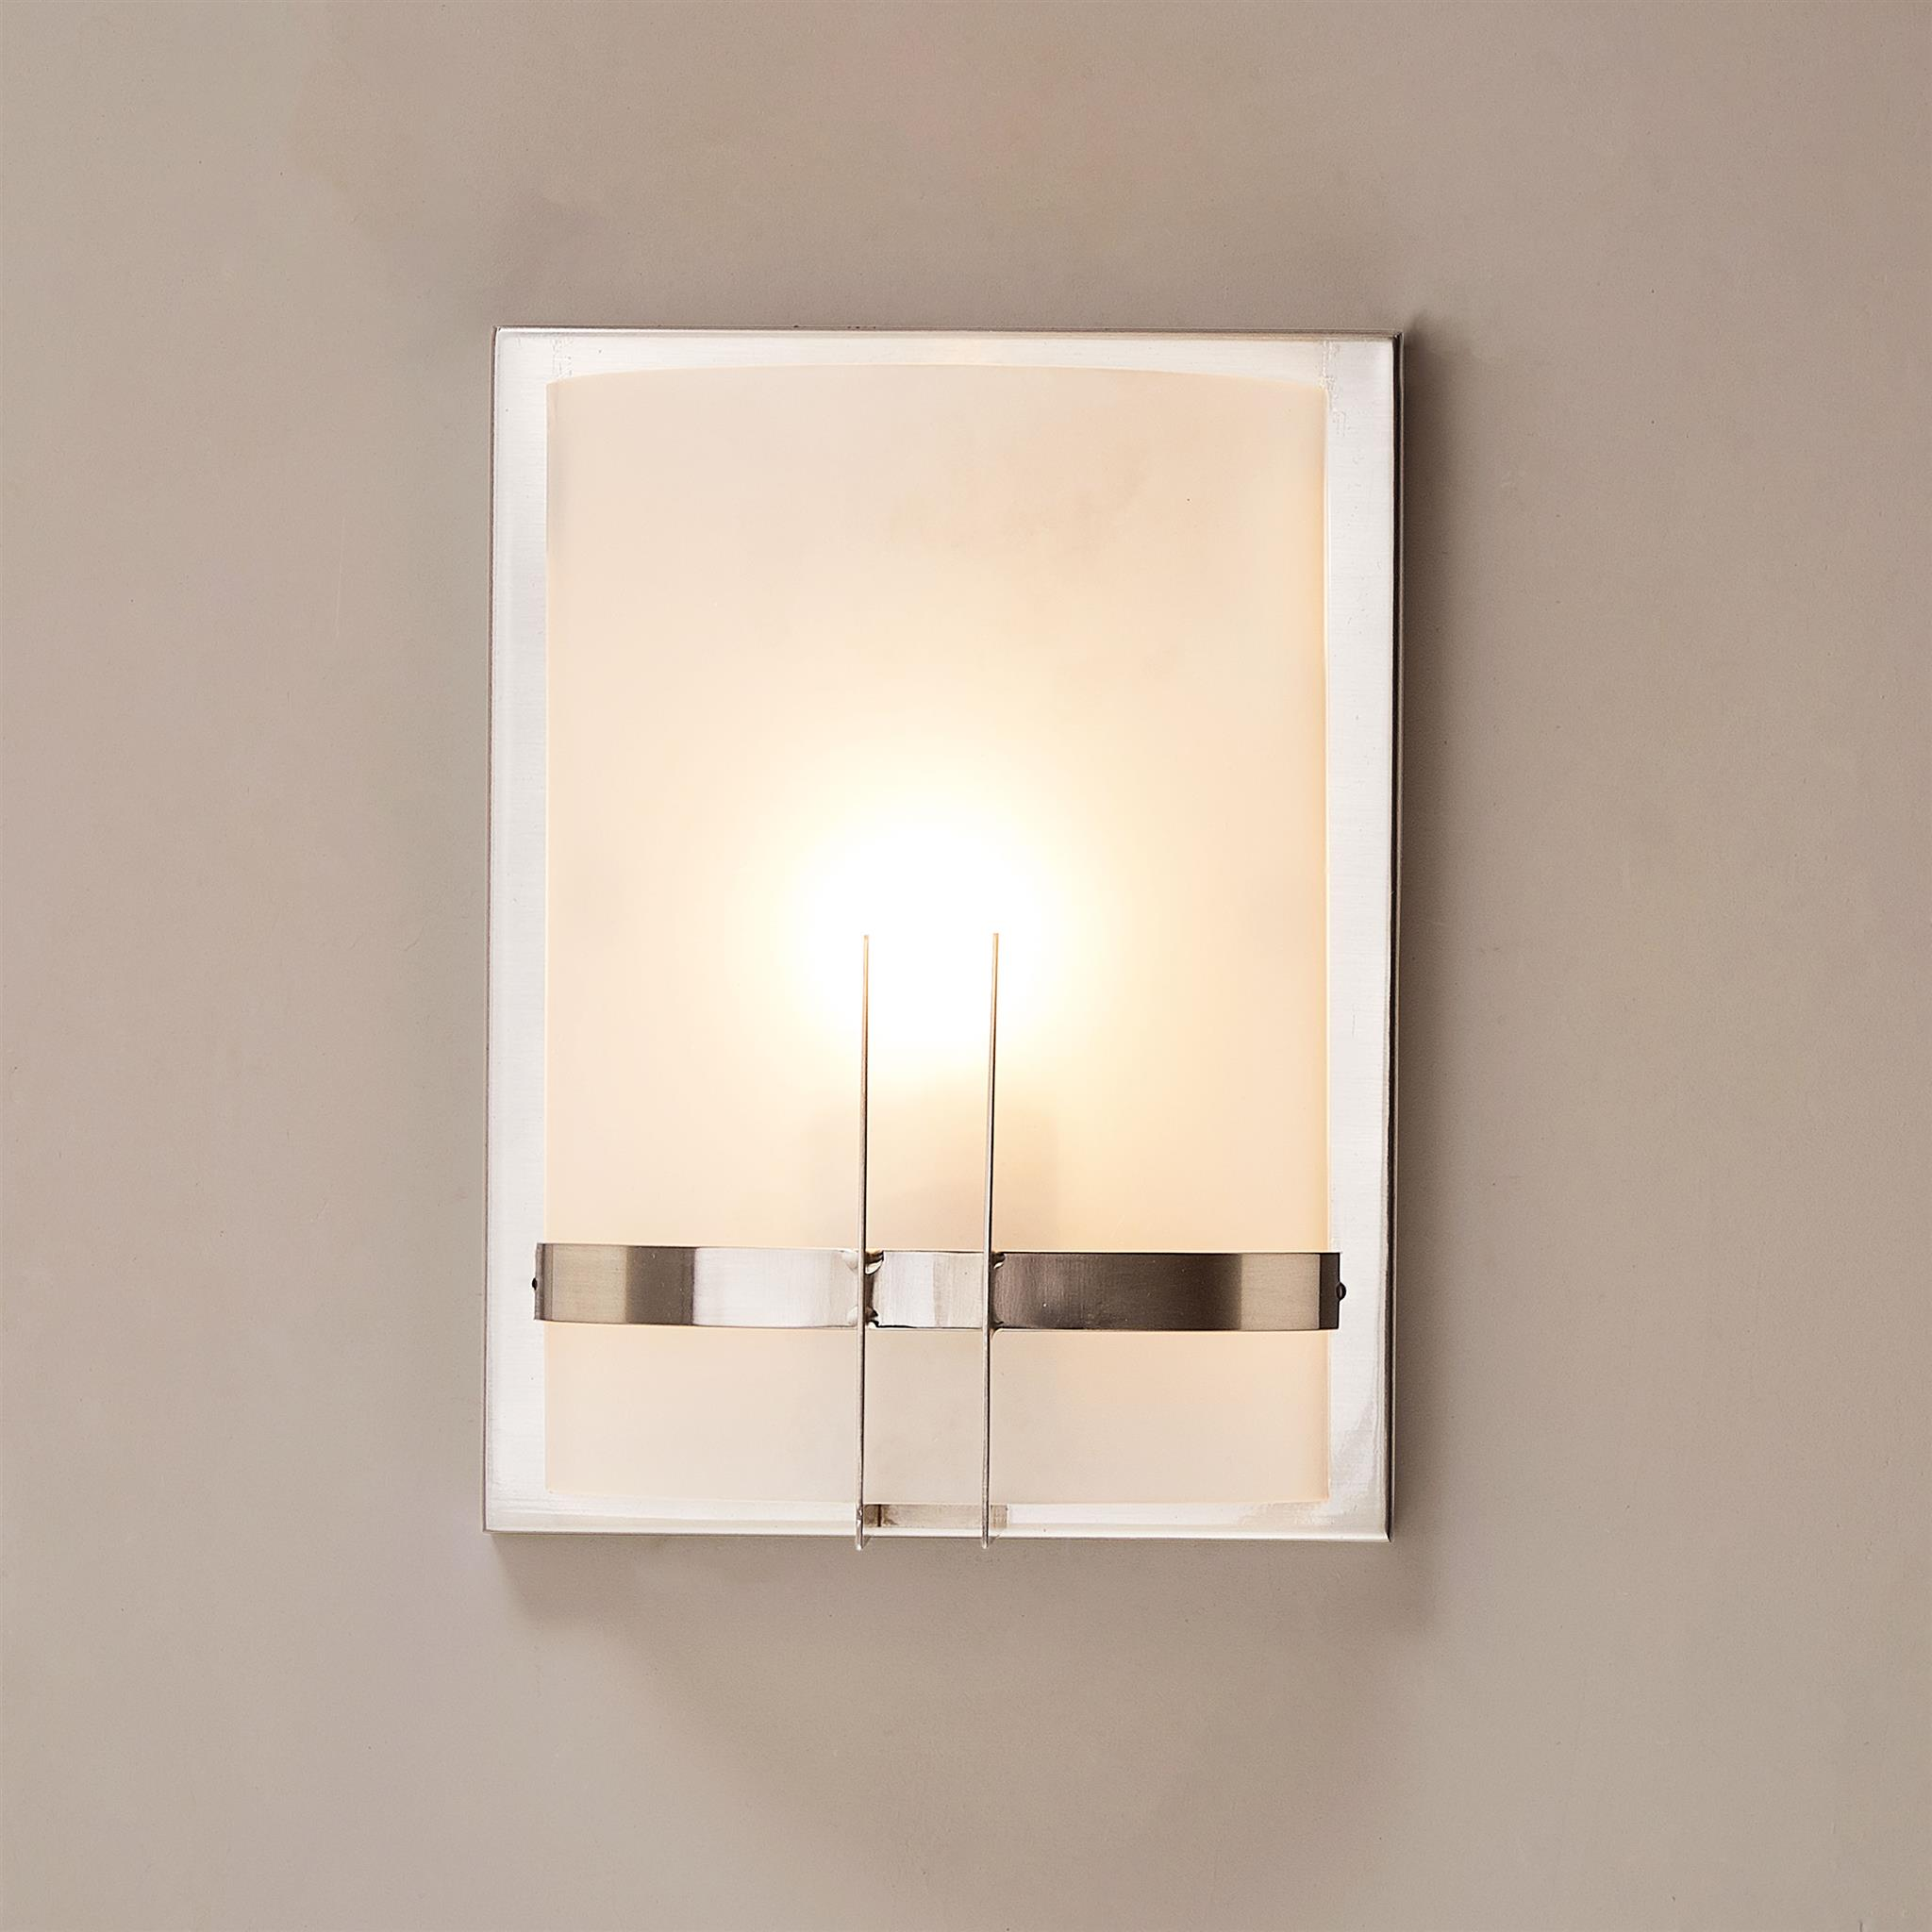 1-Light, Decorative ARC Wall Sconce Fixture, Brushed Nickel Finish with White glass shade, Dim: 9